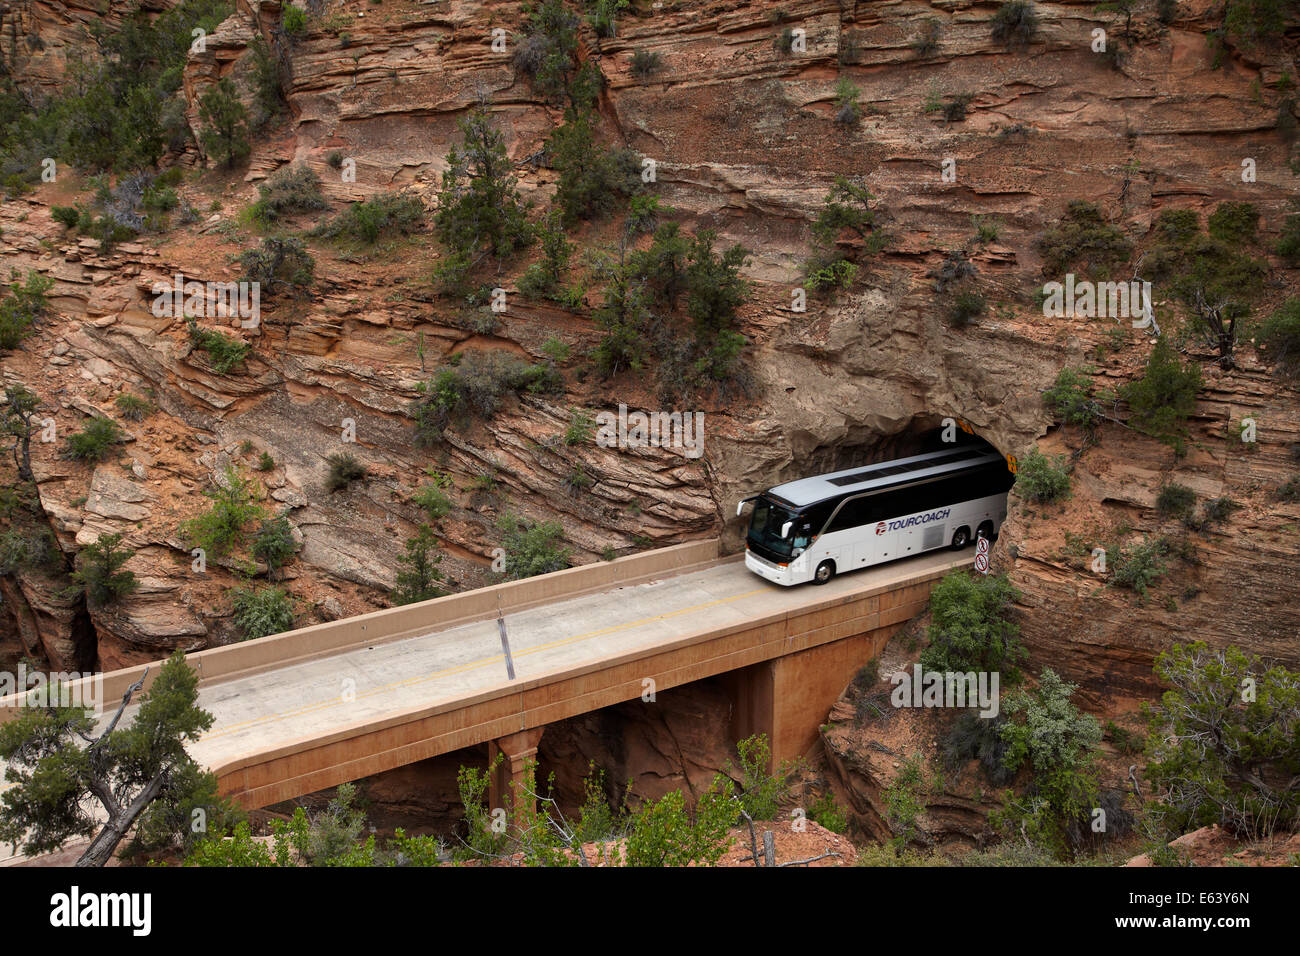 Bus exiting east portal of Zion Tunnel, Zion – Mount Carmel Highway, Zion National Park, Utah, USA Stock Photo